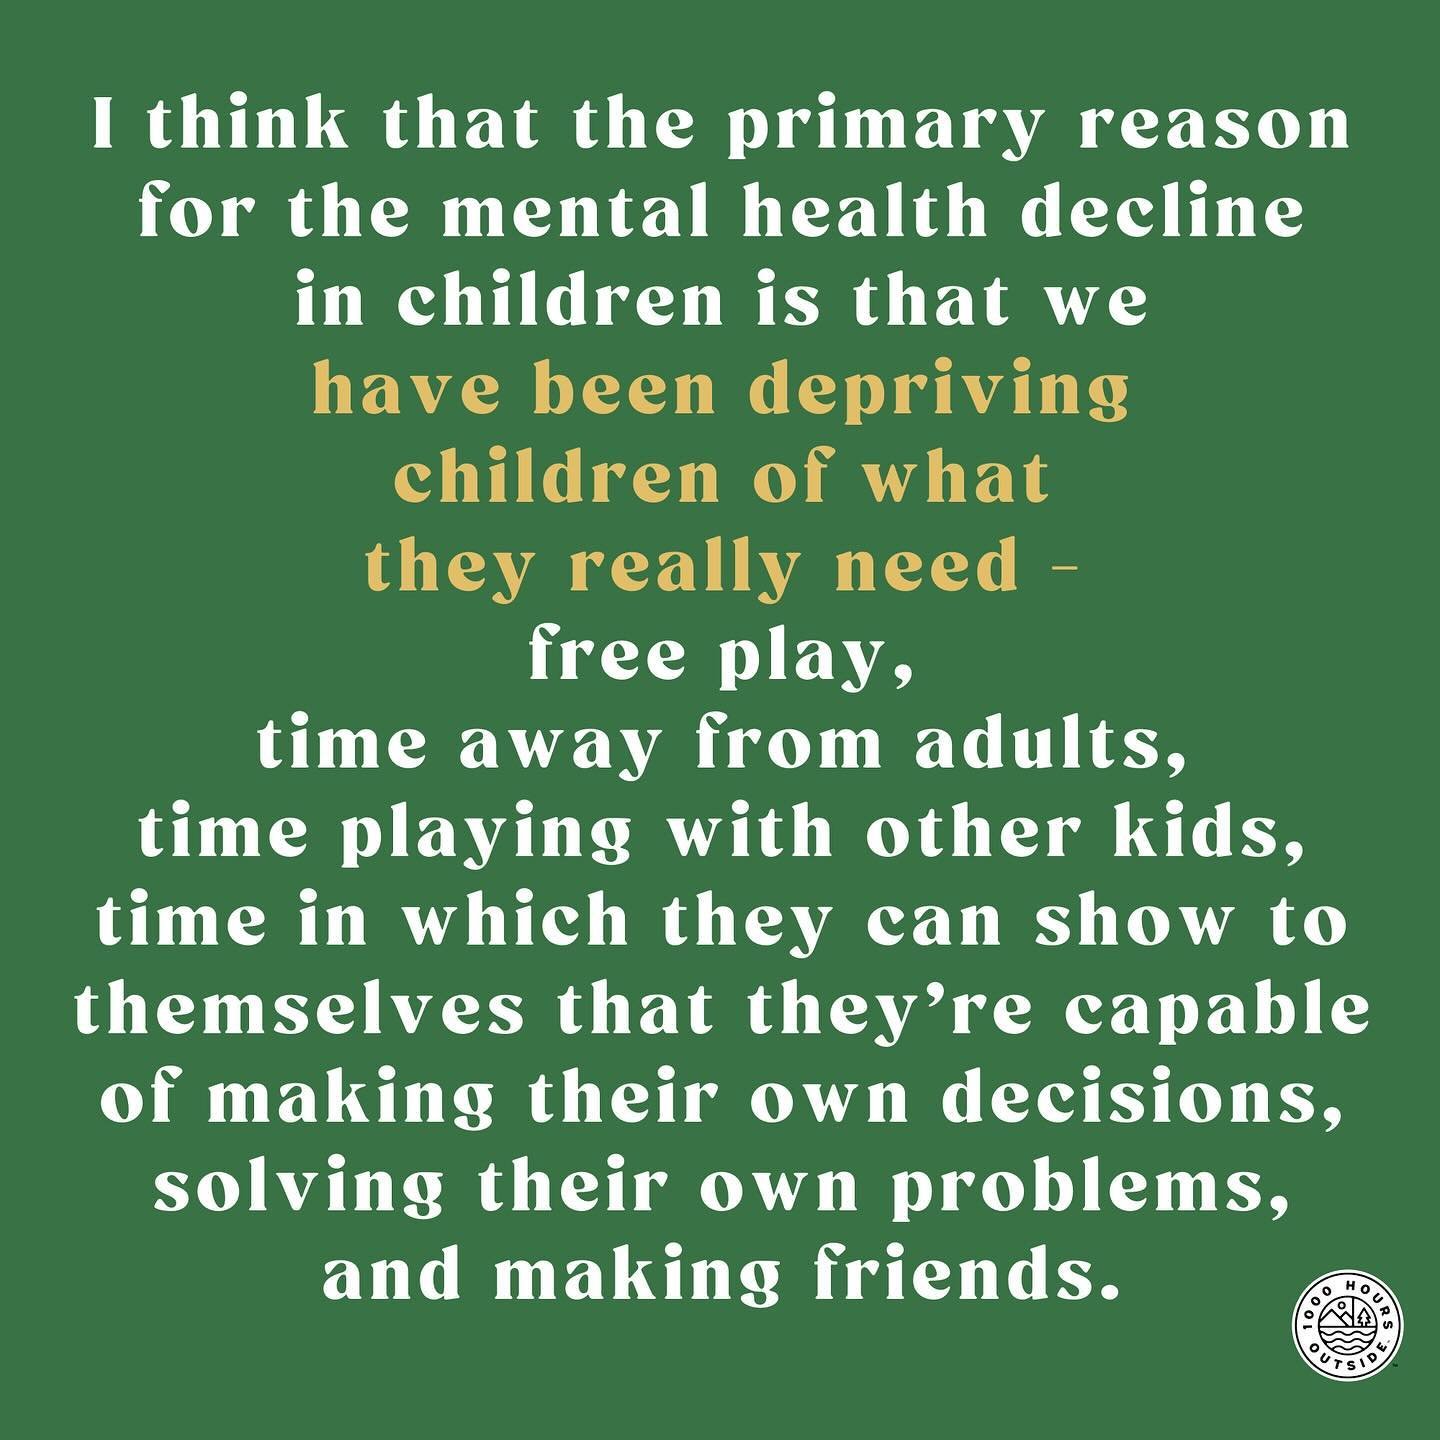 This is so important &hearts;️

More play will make your life easier and it will be so good for your kids 🫶. It&rsquo;s what they really need.

Listen to more from Dr. Peter Gray this weekend. He&rsquo;s been on our podcast two times. Episode 159 an